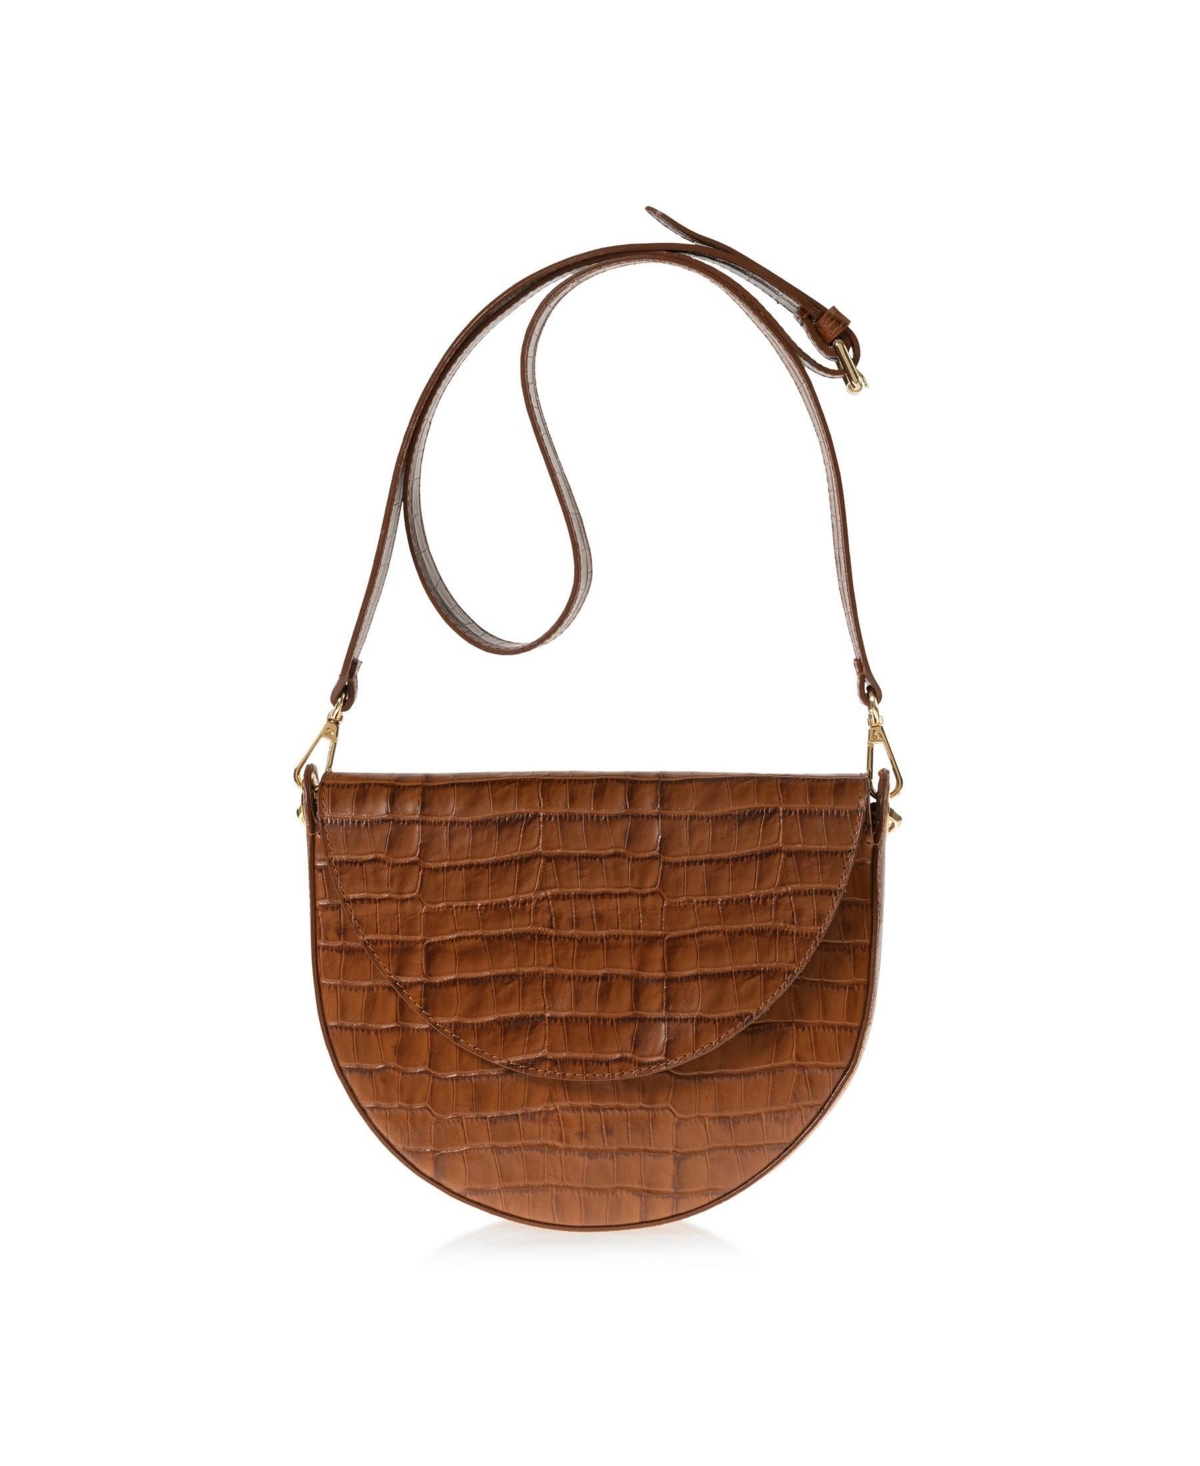 Womens Leather Embossed Croco Forget me not Bag (Saddle) - Saddle Croc-Embossed